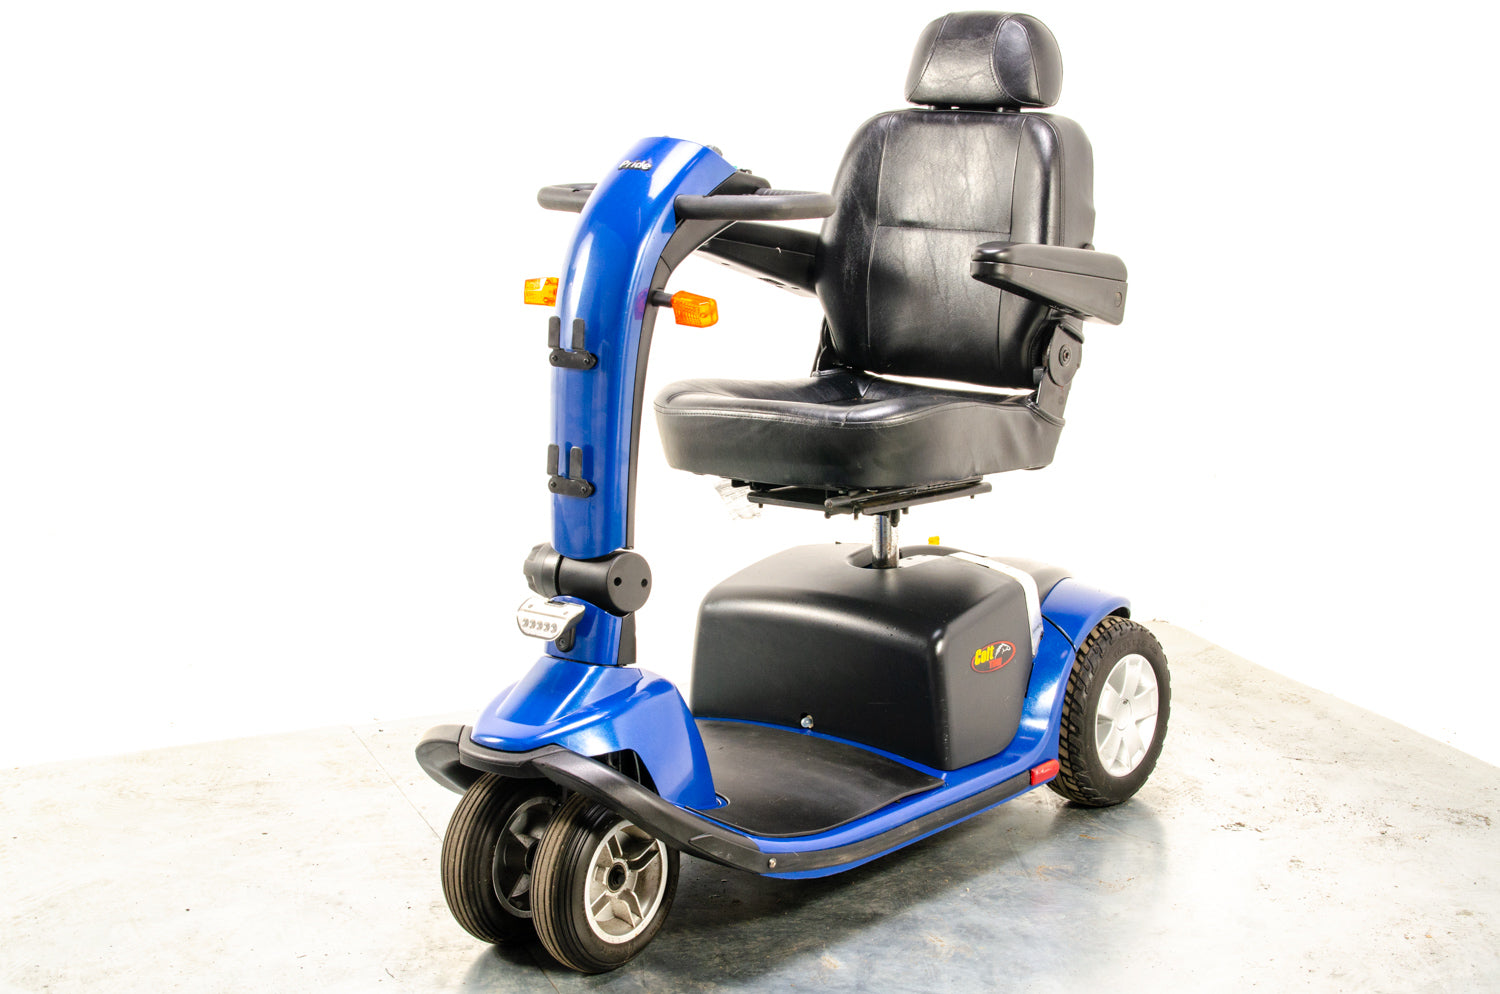 Pride Colt Twin Used Electric Mobility Scoter Transportable Trike Pavement Folding Blue 13272